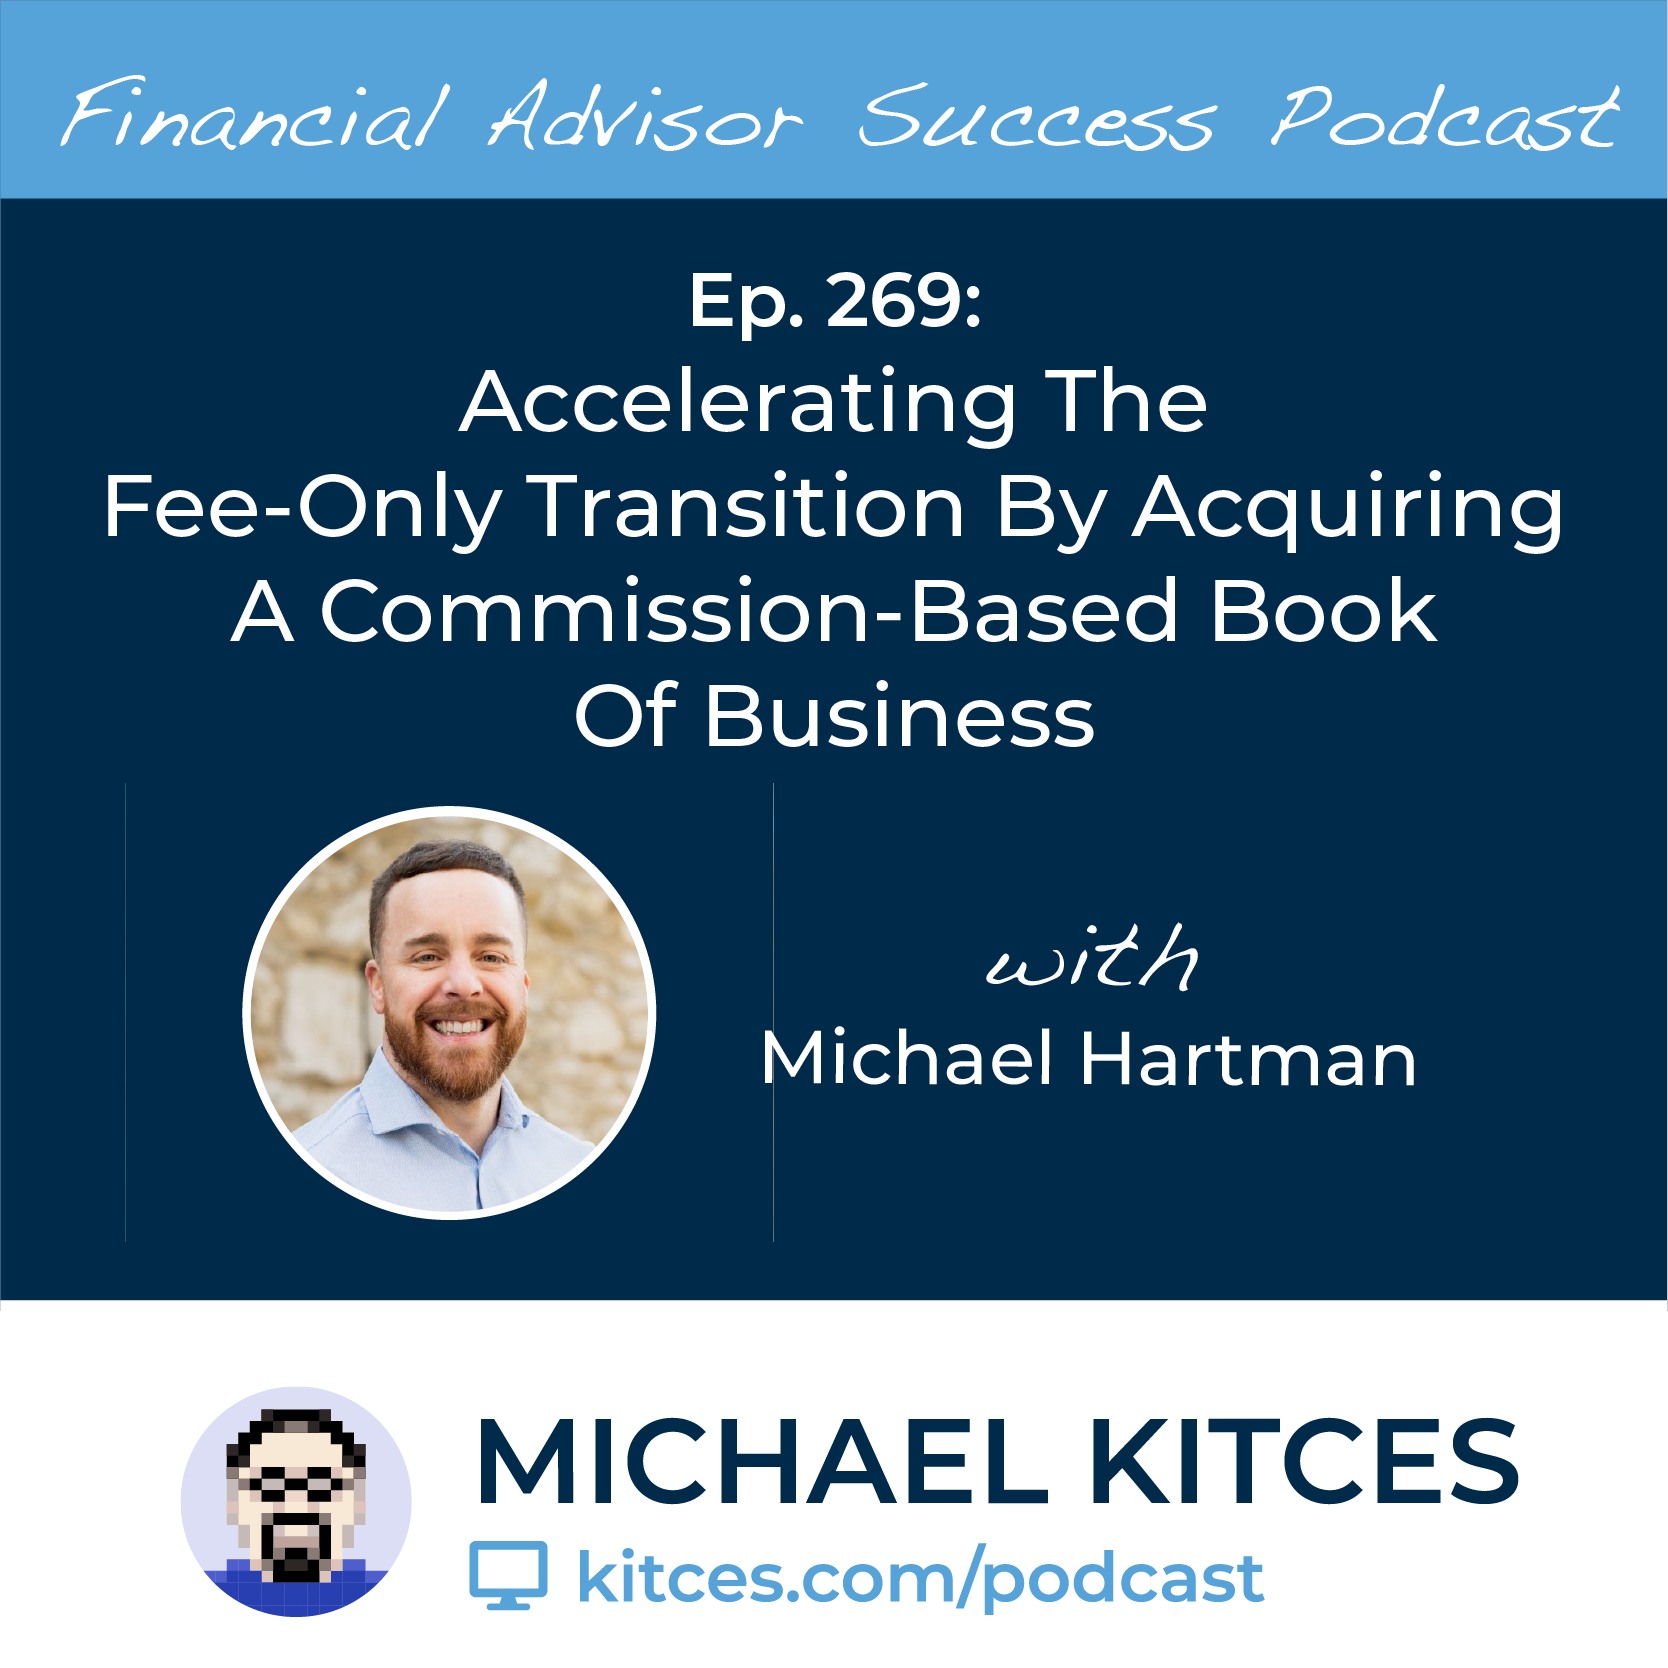 https://www.kitces.com/wp-content/uploads/2022/02/Michael-Hartman-Podcast-Featured-Image-FAS-269-01.png